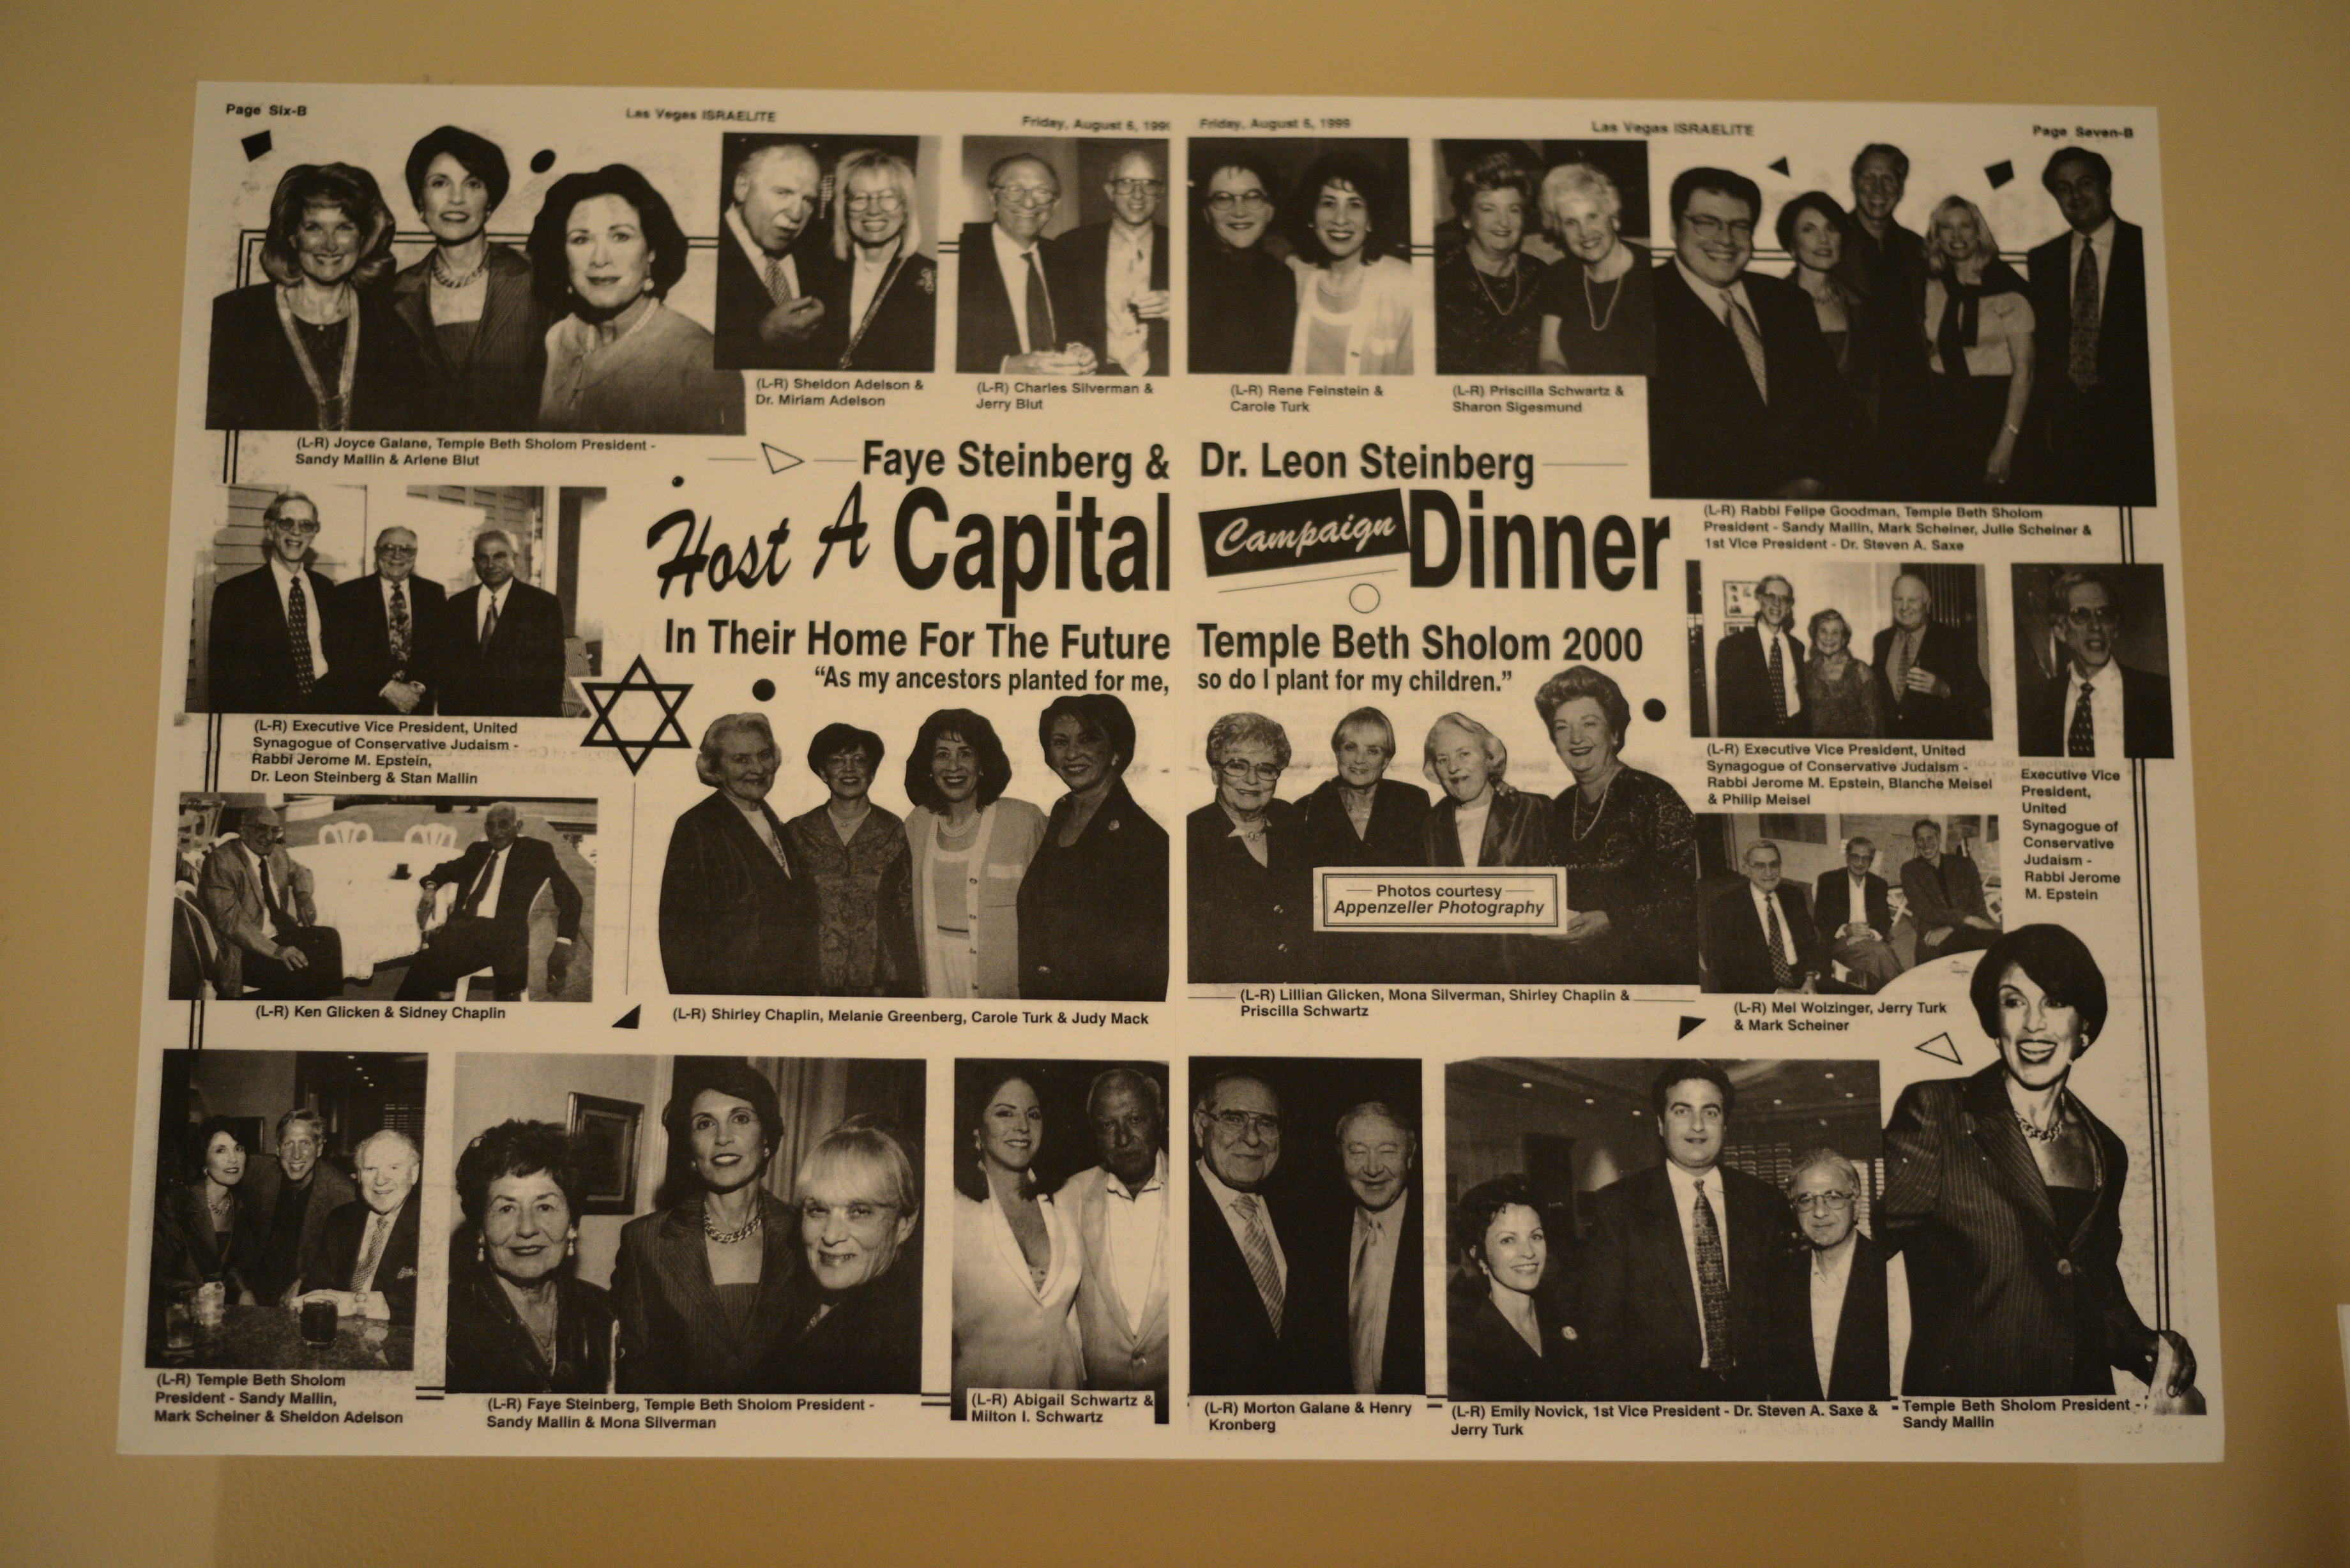 Photograph of newspaper clipping, Faye Steinberg and Dr. Leon Steinberg host capital campaign dinner in their home for the future Temple Beth Sholom 2000, Las Vegas Israelite, August 6, 1999